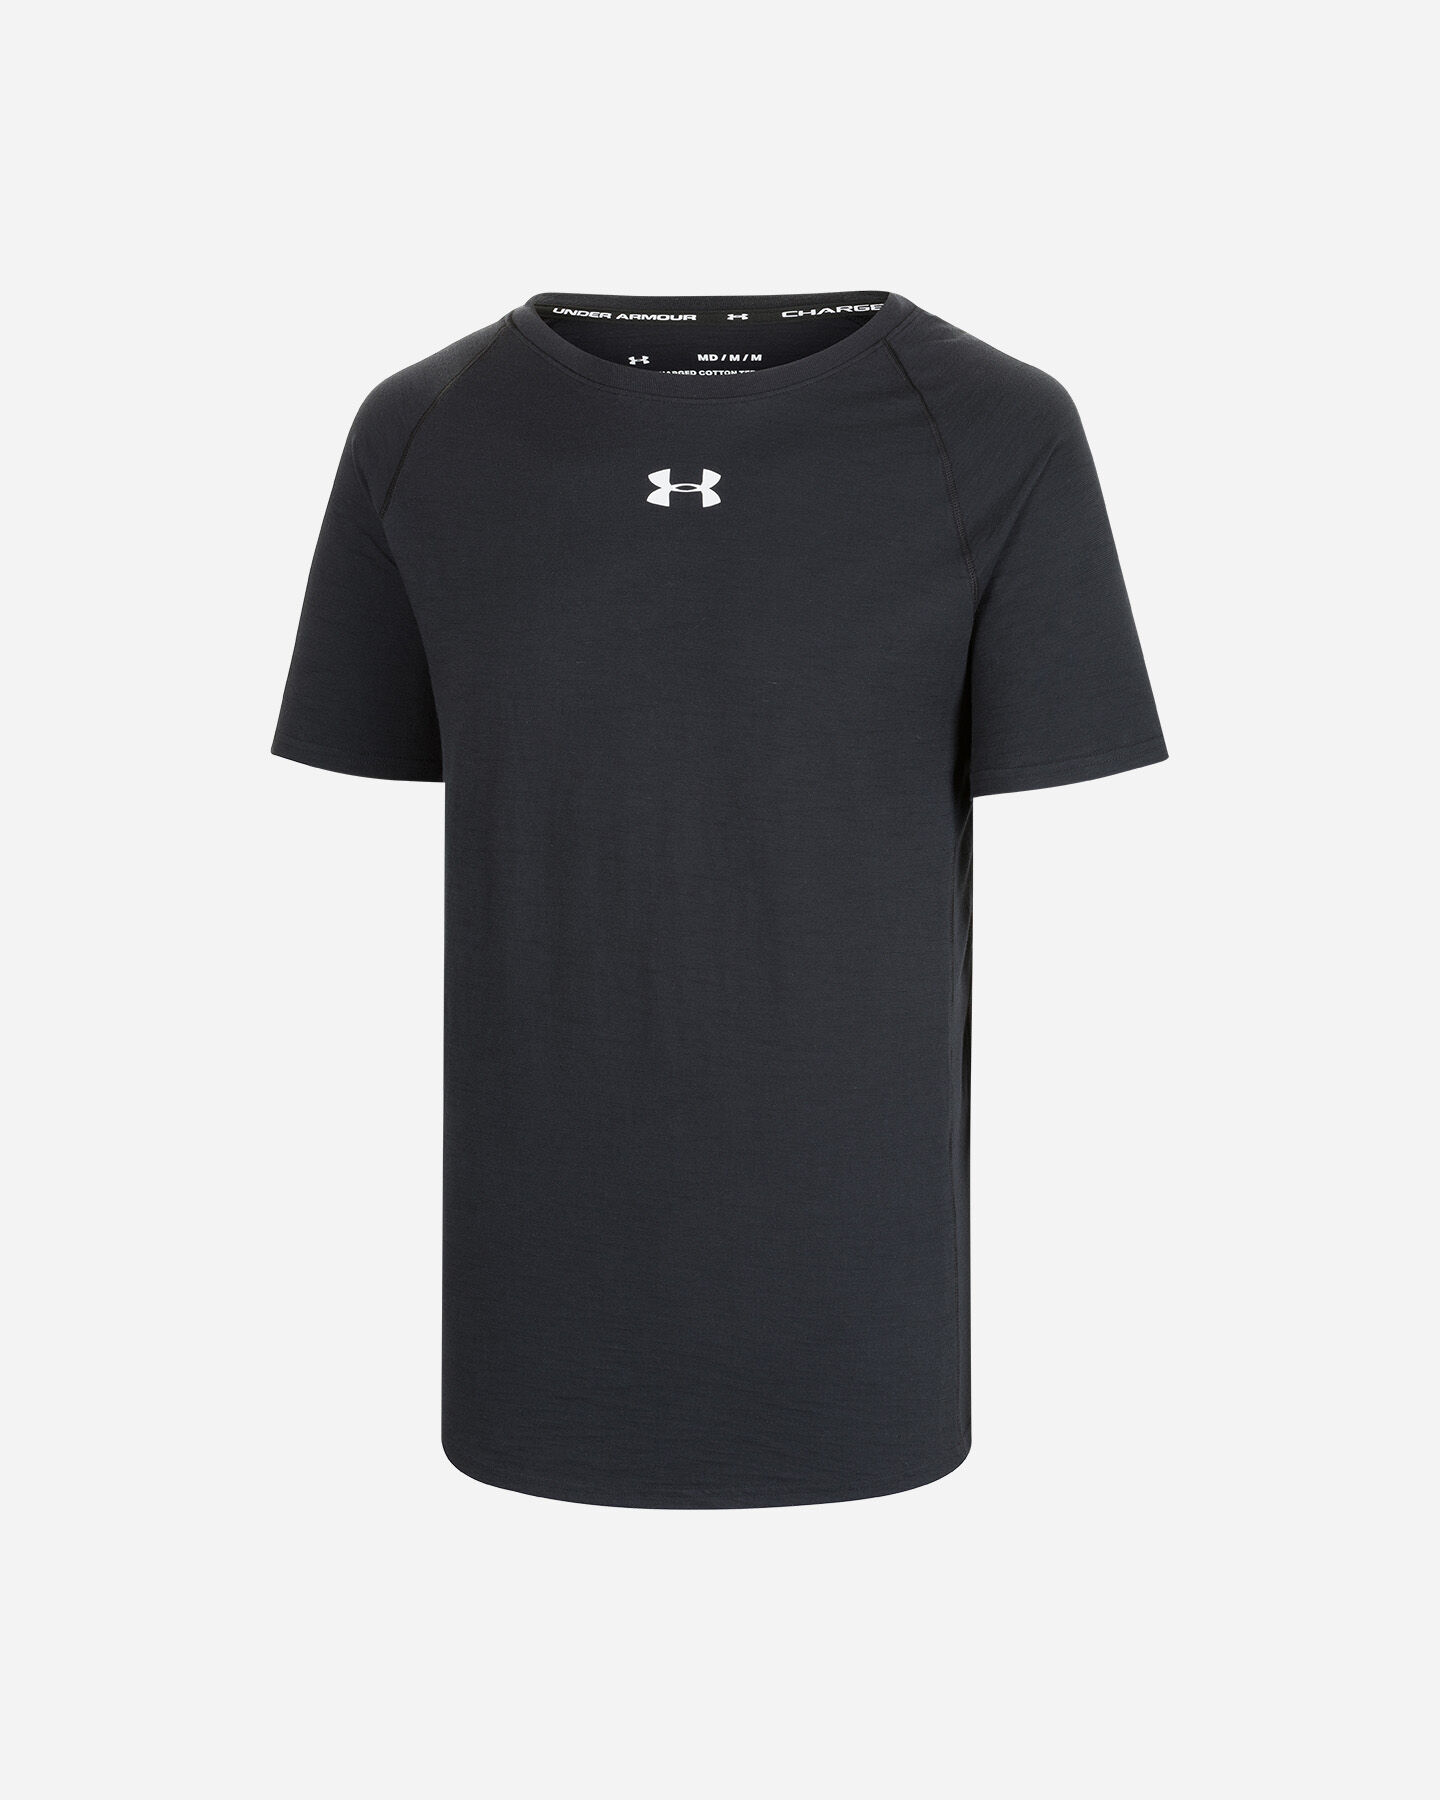  T-Shirt training UNDER ARMOUR CHARGED M S5169035|0001|SM scatto 0